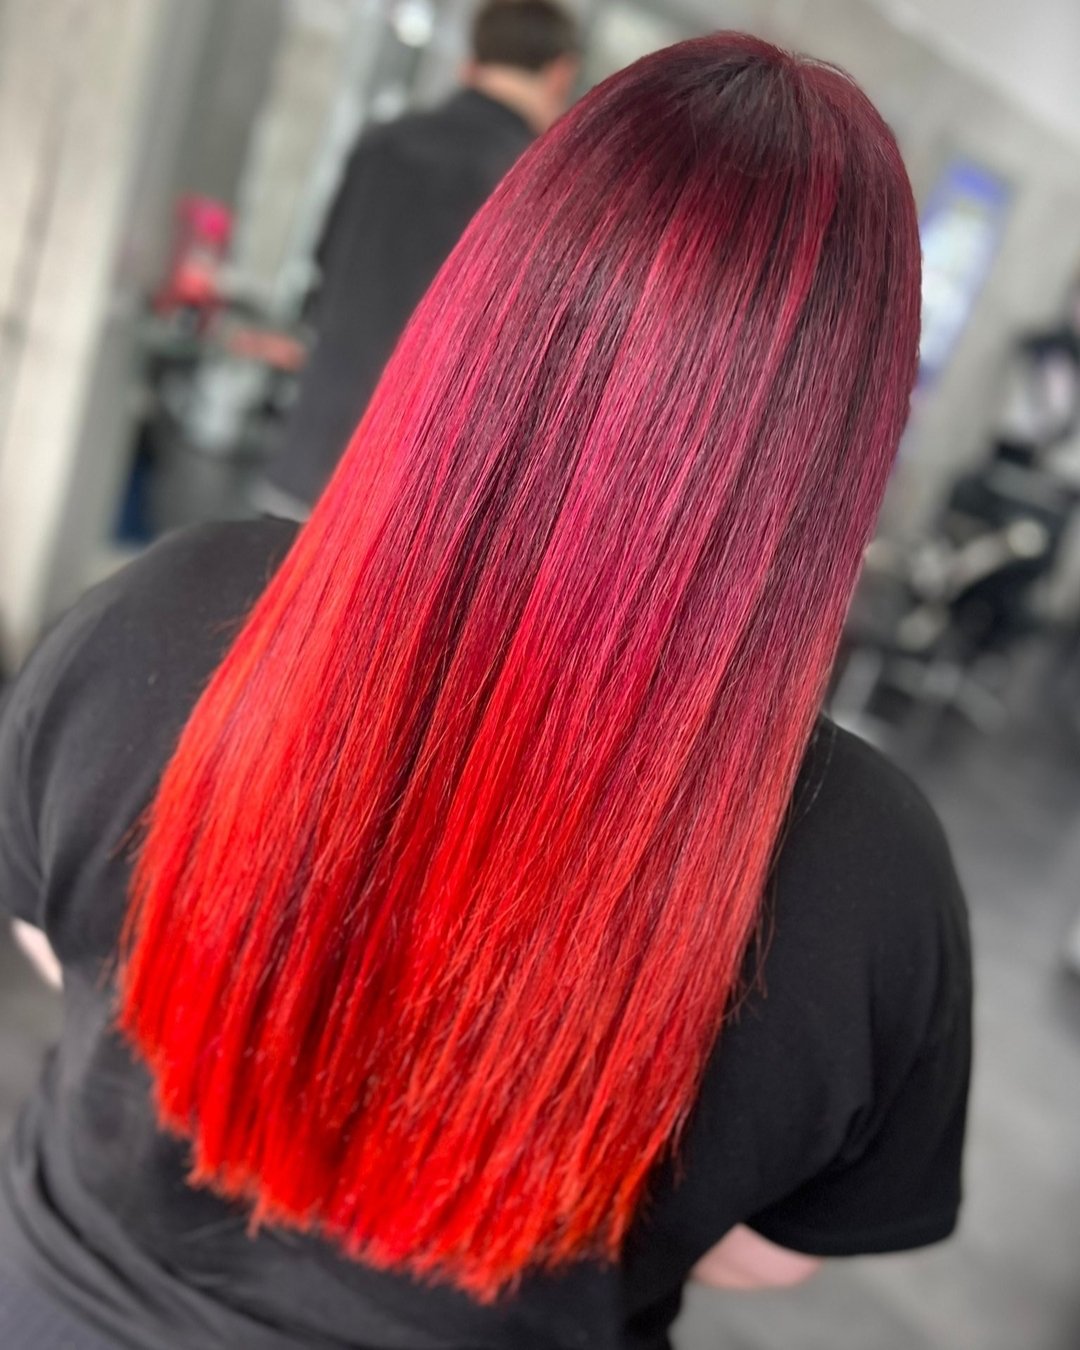 🔥Ignite your style with the smouldering allure of a bold red ombre! 🔥 

Unleash your inner fire and embrace the power of red! 💫 

#BoldRedOmbre #LongHairGoals #RoarHairandBeauty #GlasgowSalon #HairRevolution #RoarRewards